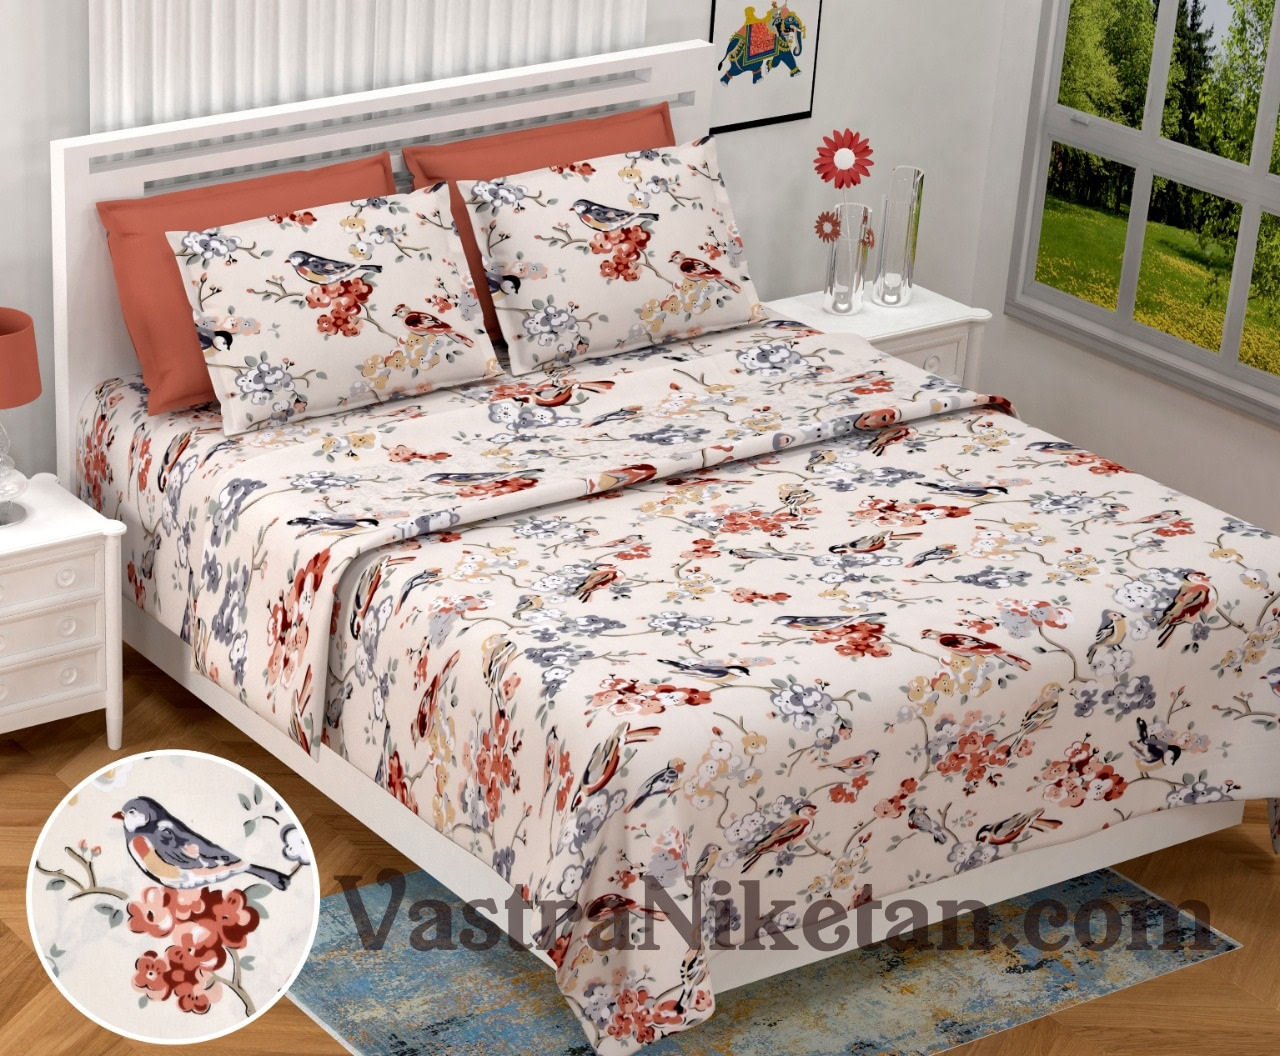 Heritage King Size Double Bedsheet with Sparrow and Floral print